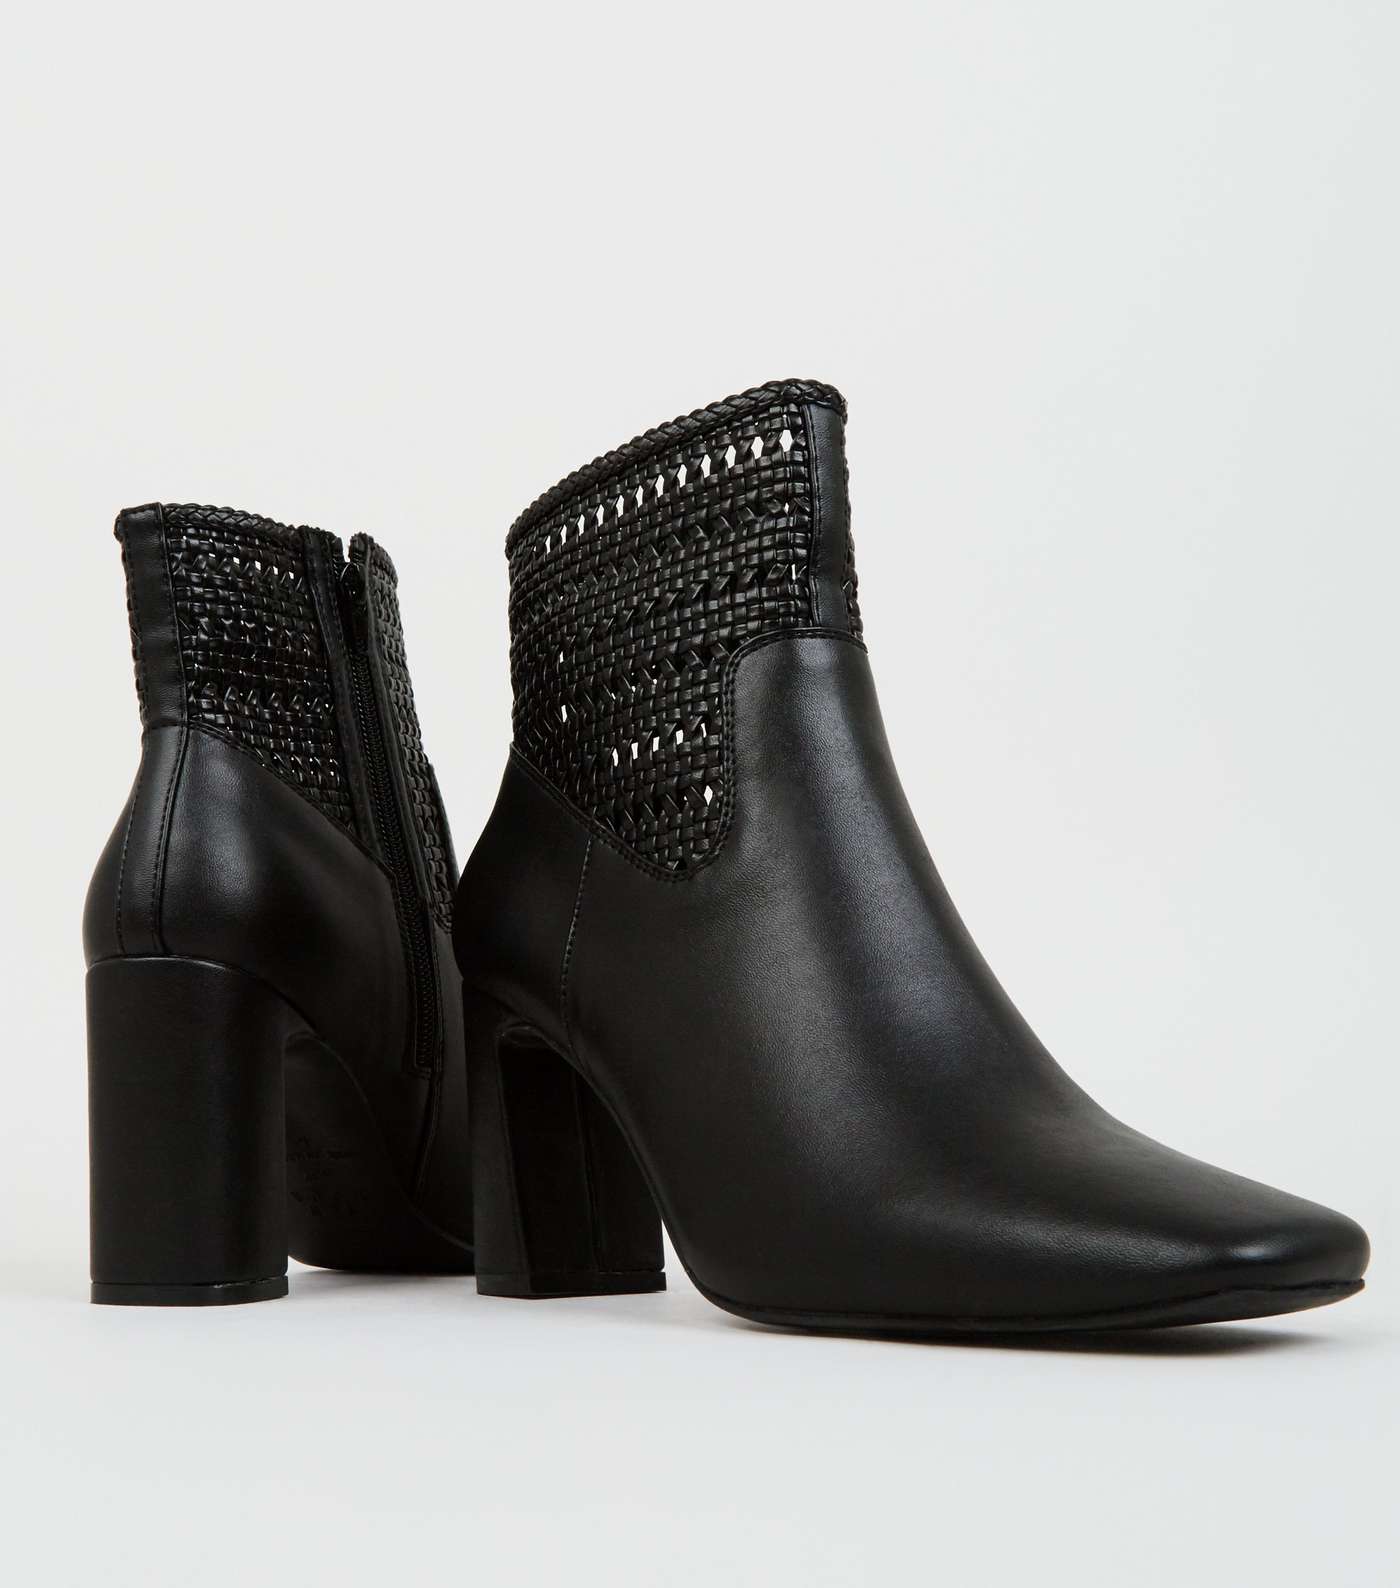 Black Leather-Look Woven Flare Heel Boots Image 4